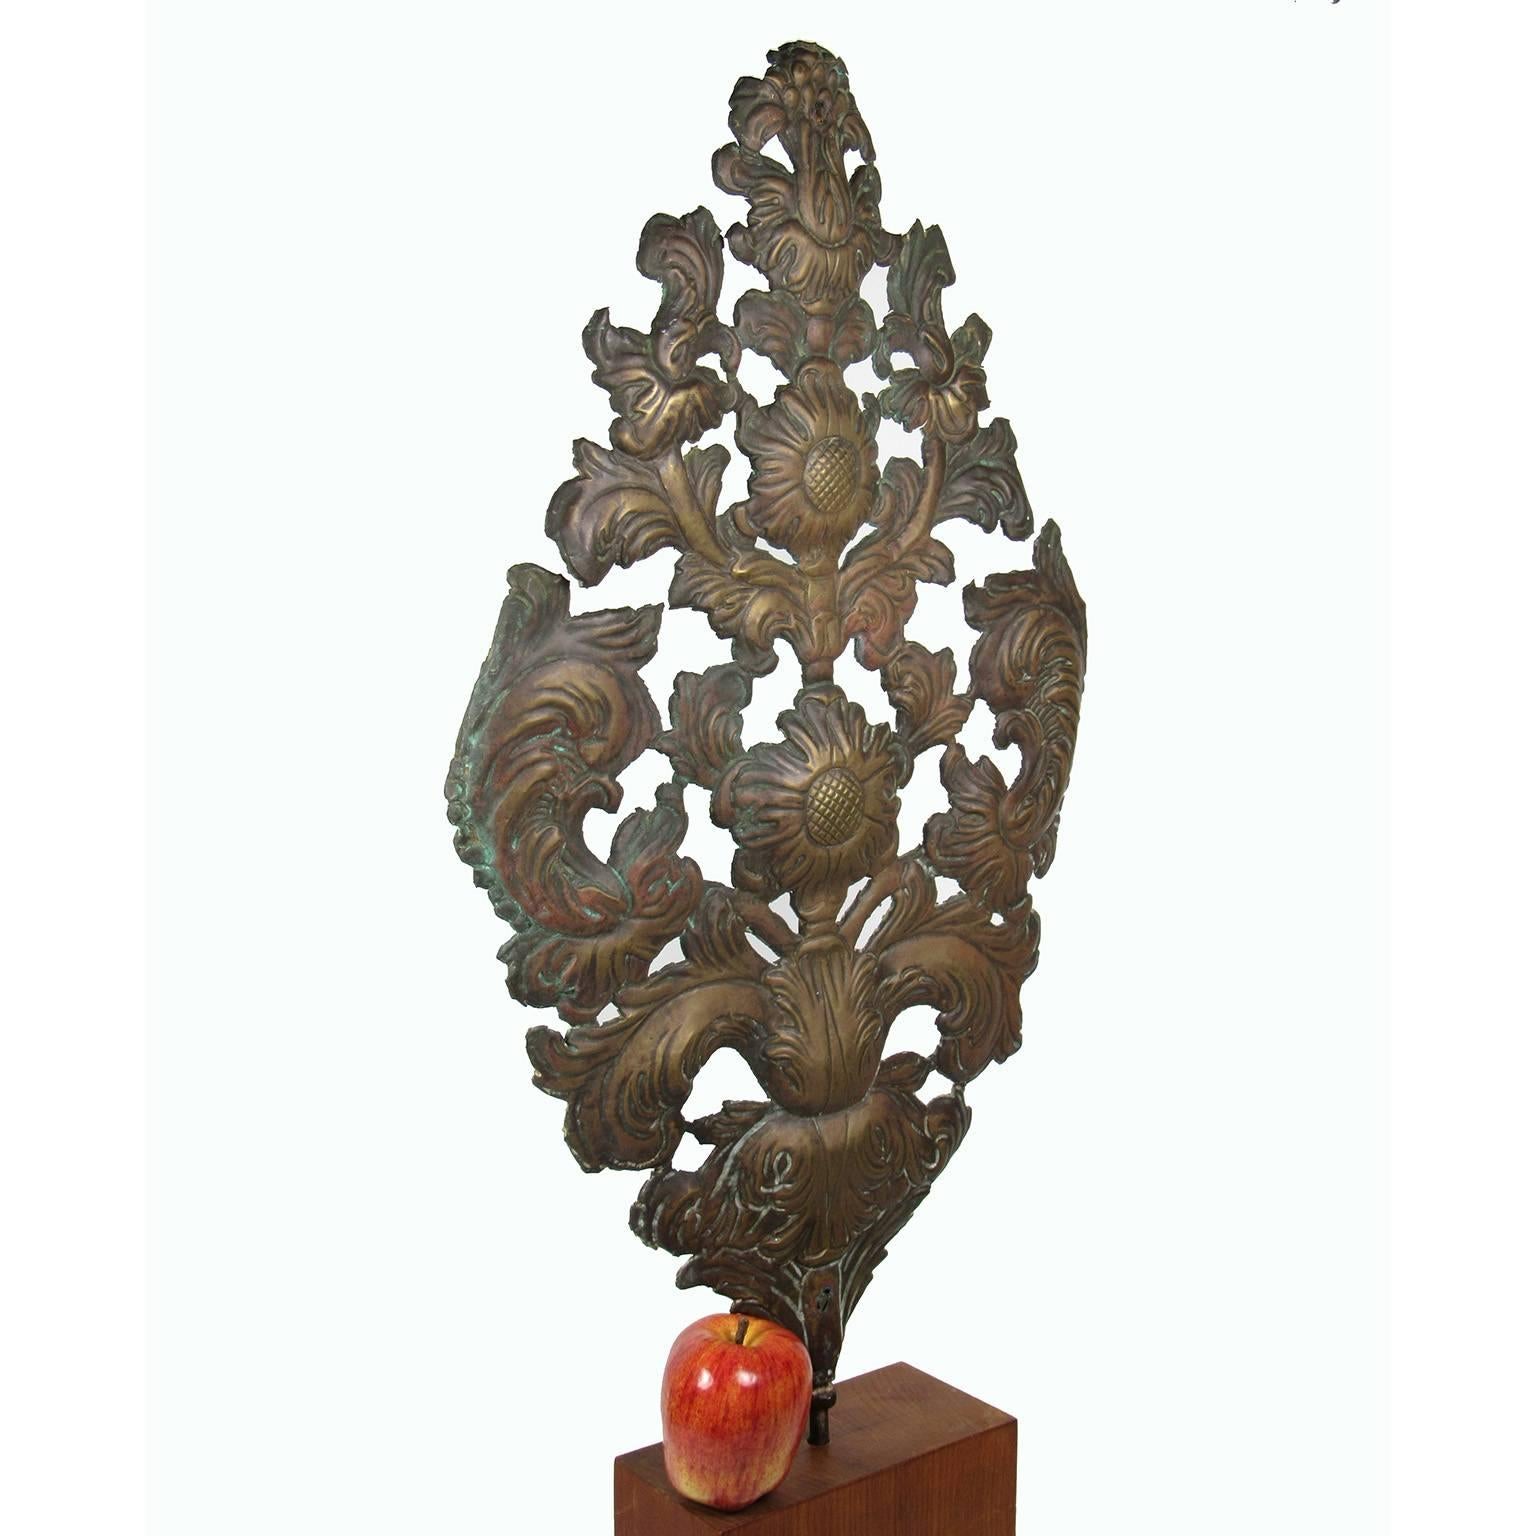 Early to mid-19th century molded and pierced copper architectural decoration, with floral decoration.
Dimensions: 27 x 15 inches.